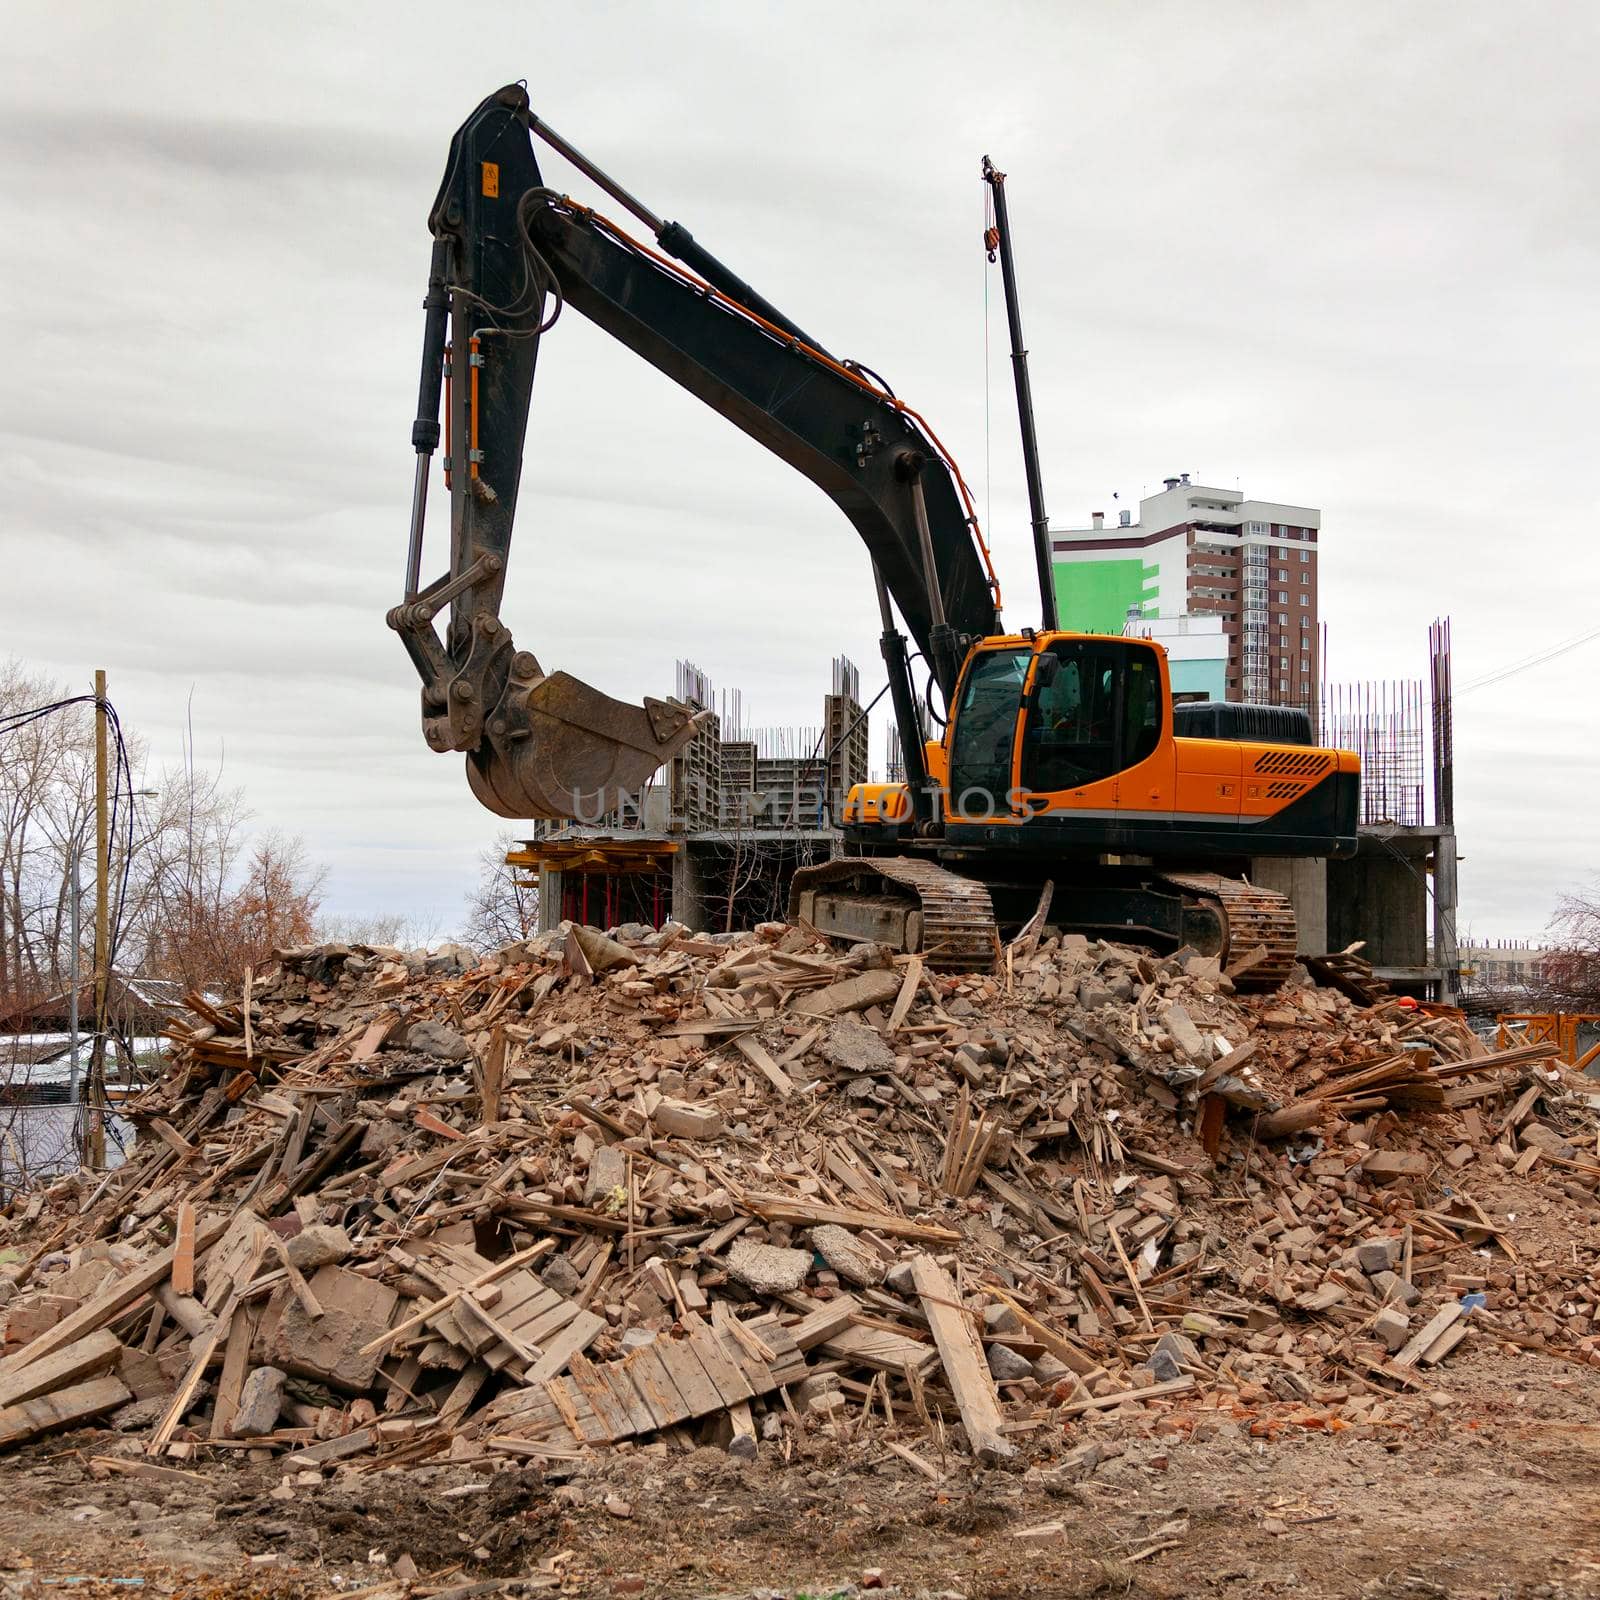 Demolition of an old building by modern excavator by Nobilior